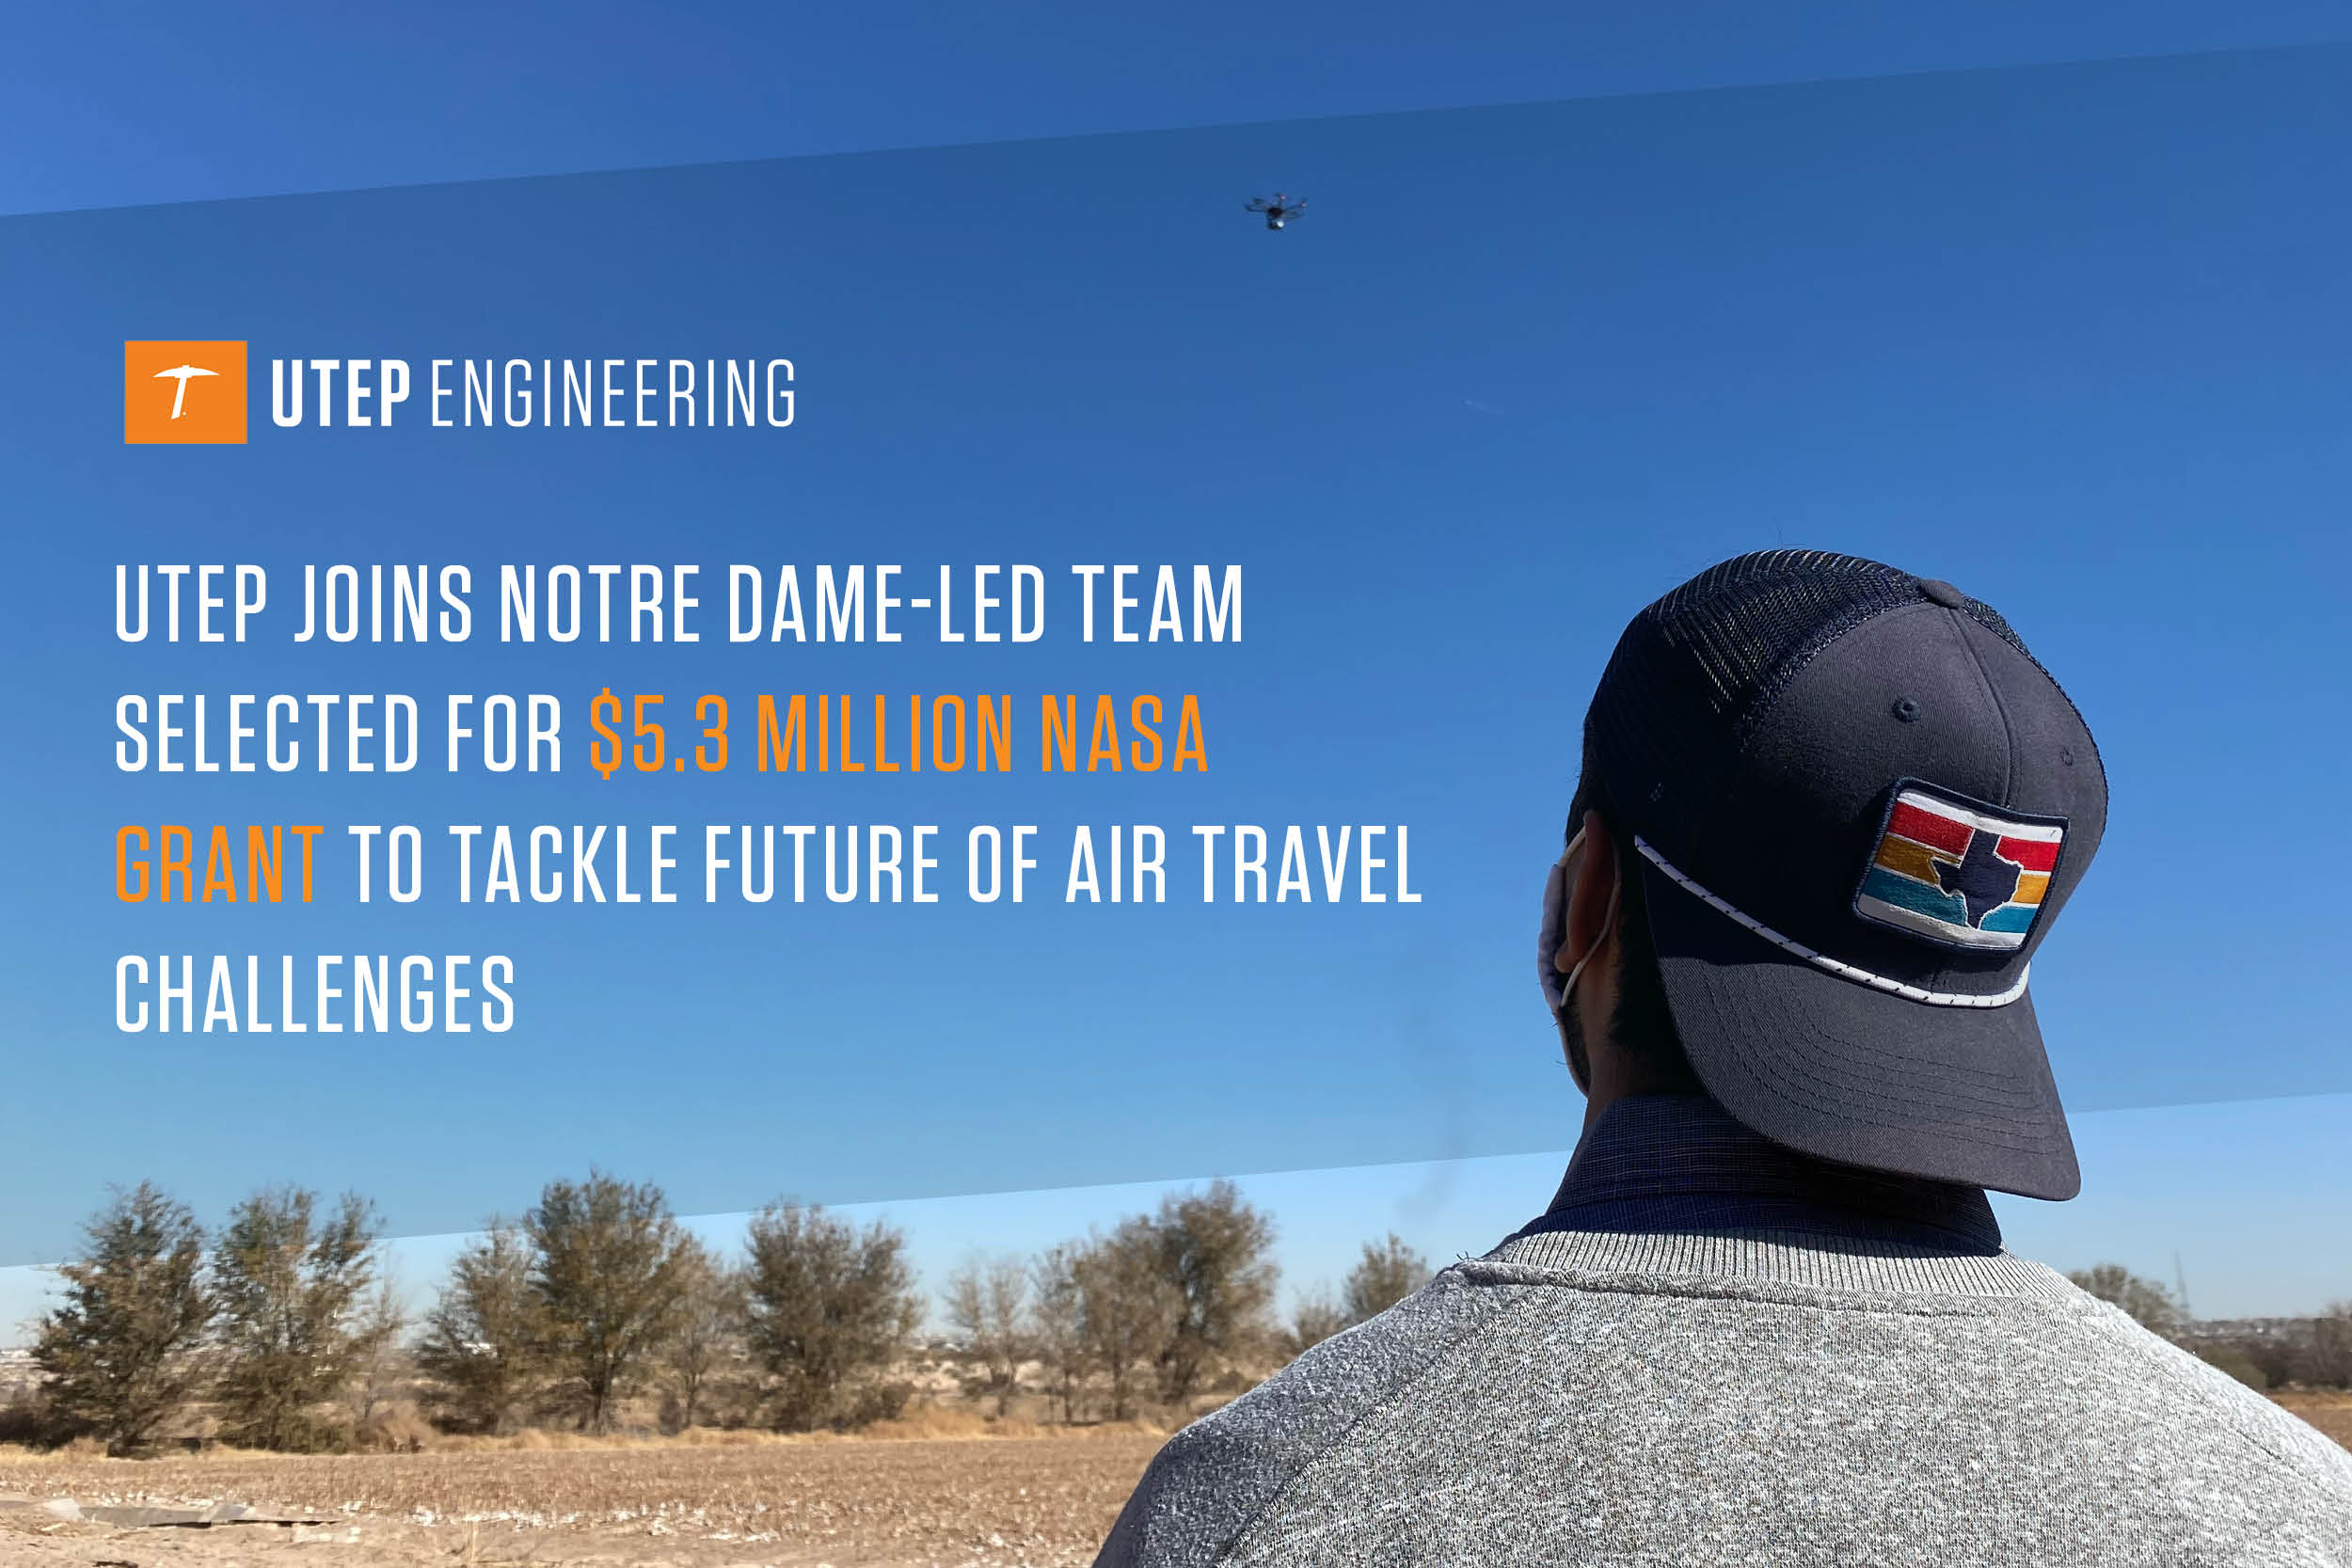 UTEP Joins Notre Dame Led Team Selected for 5.3 Million NASA Grant to Tackle Future of Air Travel Challenges